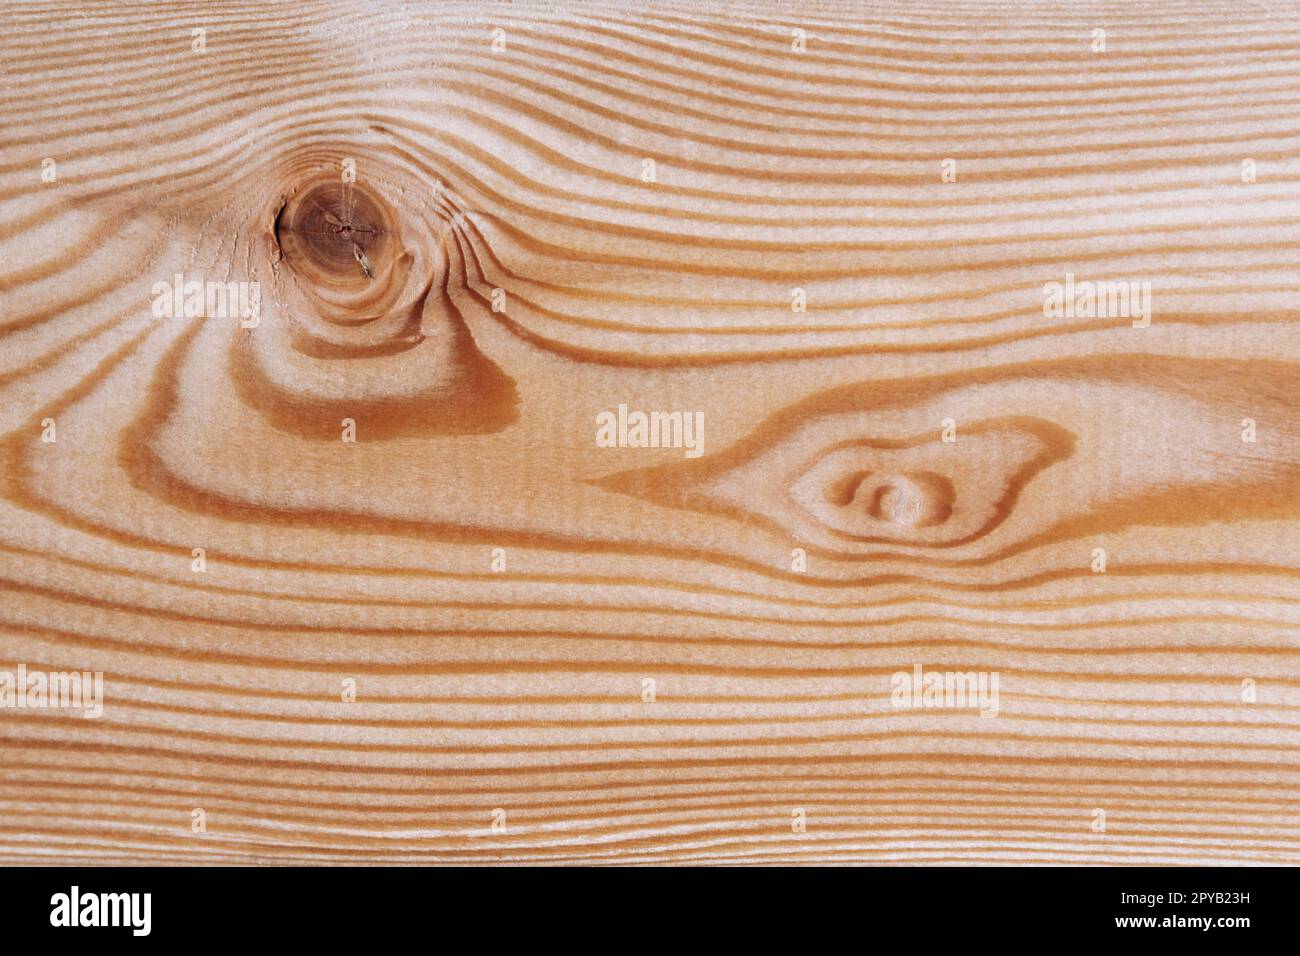 Background texture. Surface of a larch edged board with knot on cut. Wood texture. Top view. Copy space. Stock Photo